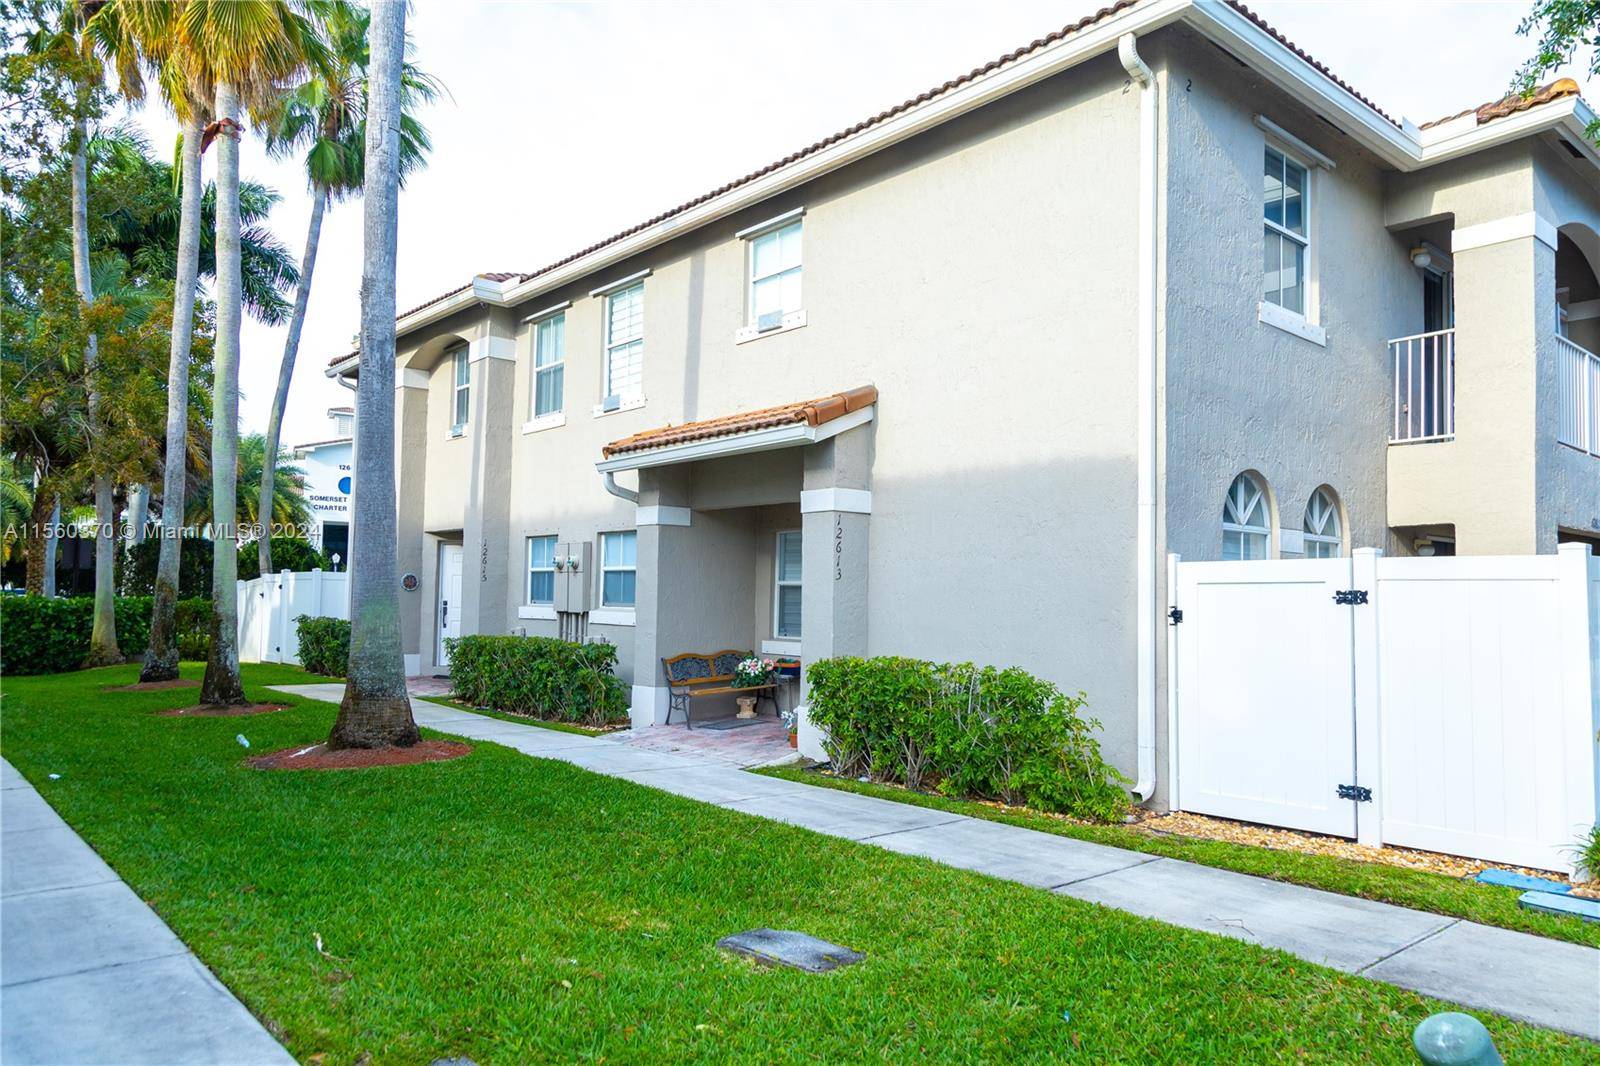 Welcome to this inviting two story townhome nestled in Bahia at Vizcaya.